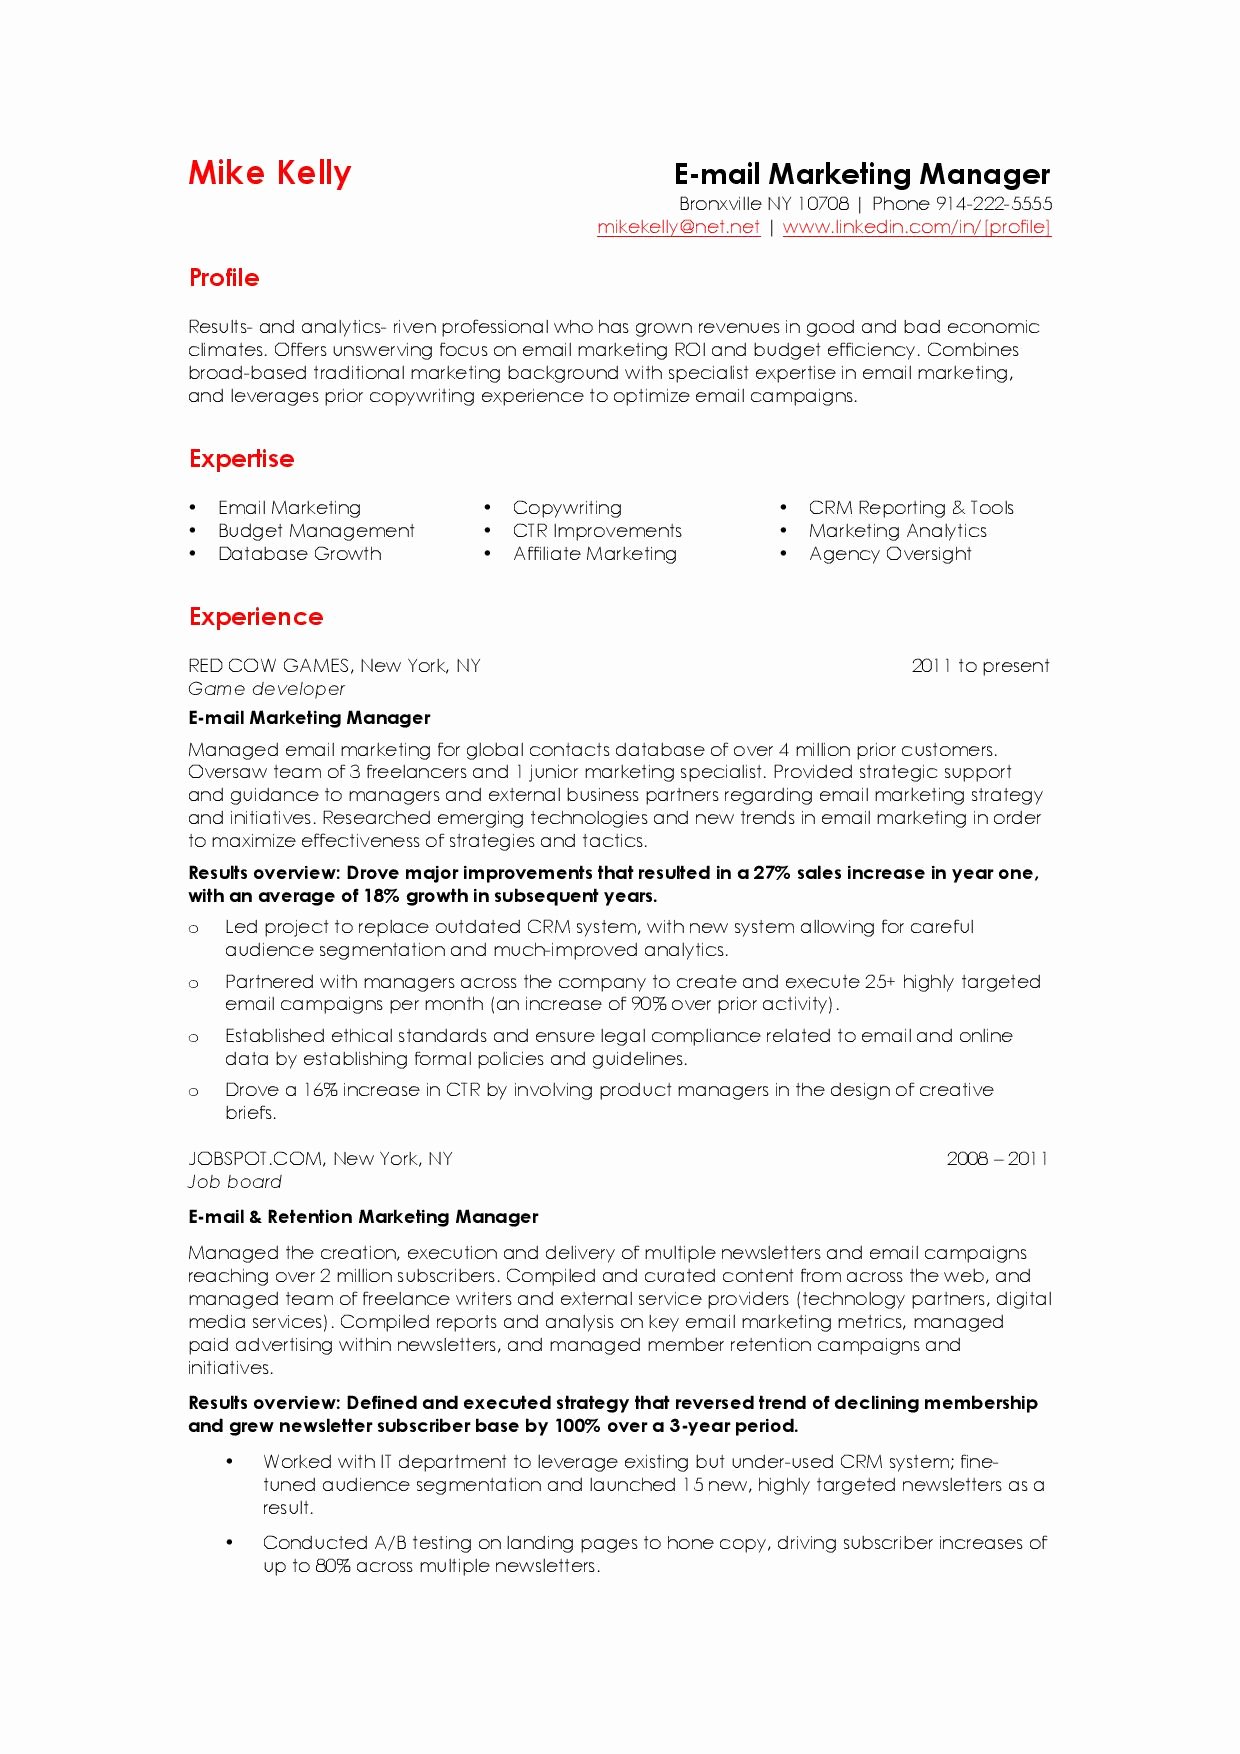 How to Write An Email Marketing Resume Sample that Hrs Choose